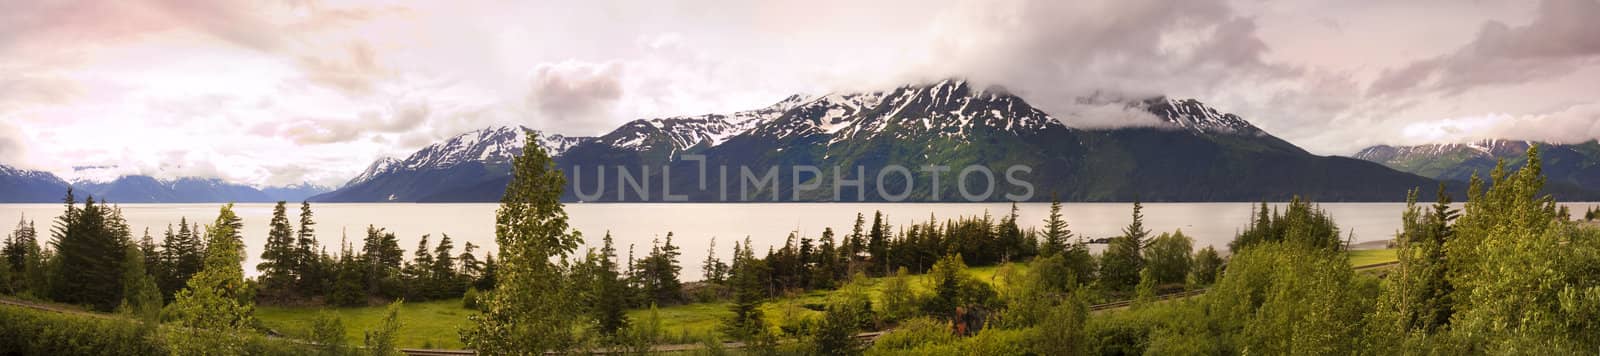 Panorama of Alaska, with the turn around arm, and snow on the mountains